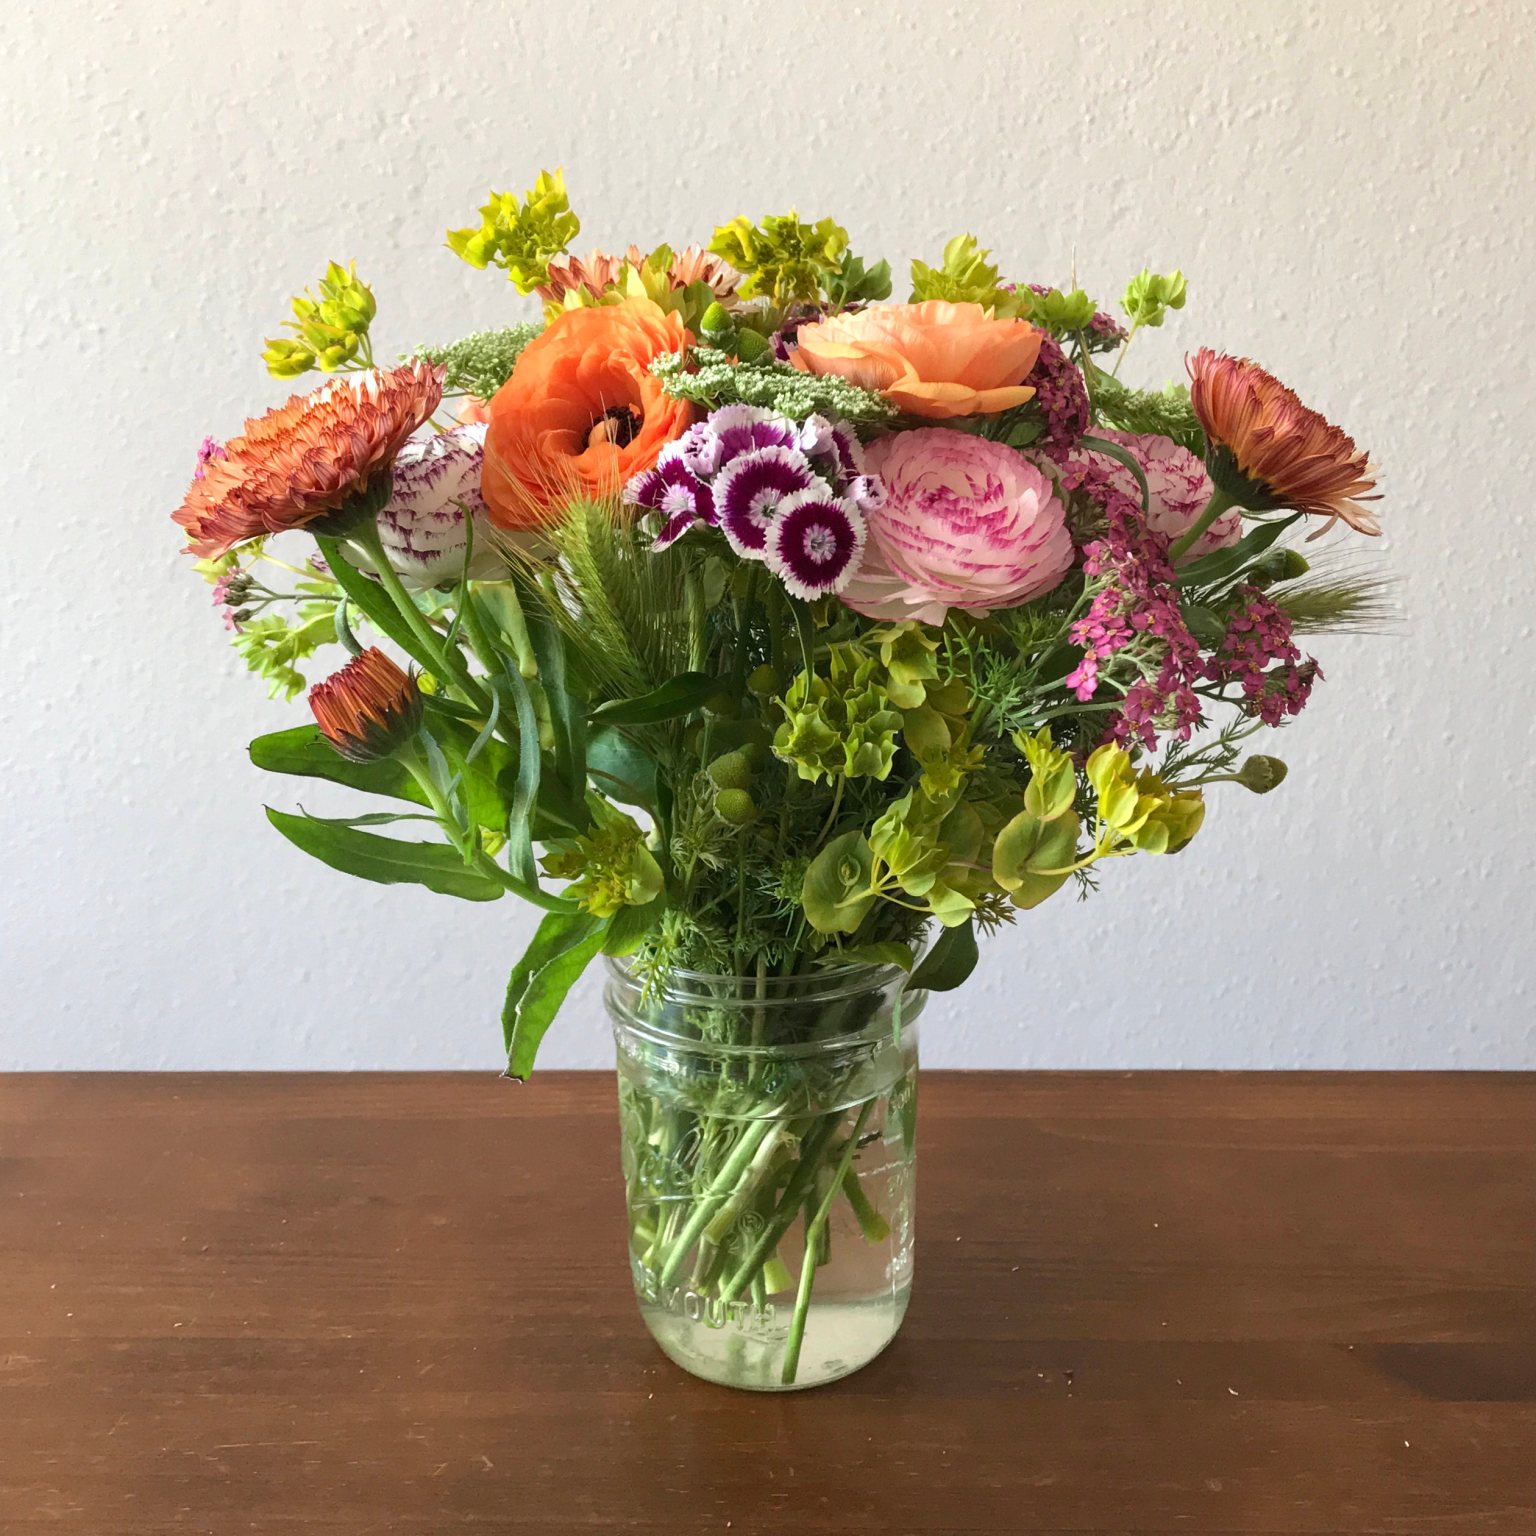 Bouquet of mixed flowers in a glass jar for a vase. The vase is sitting on a dark wooden table.